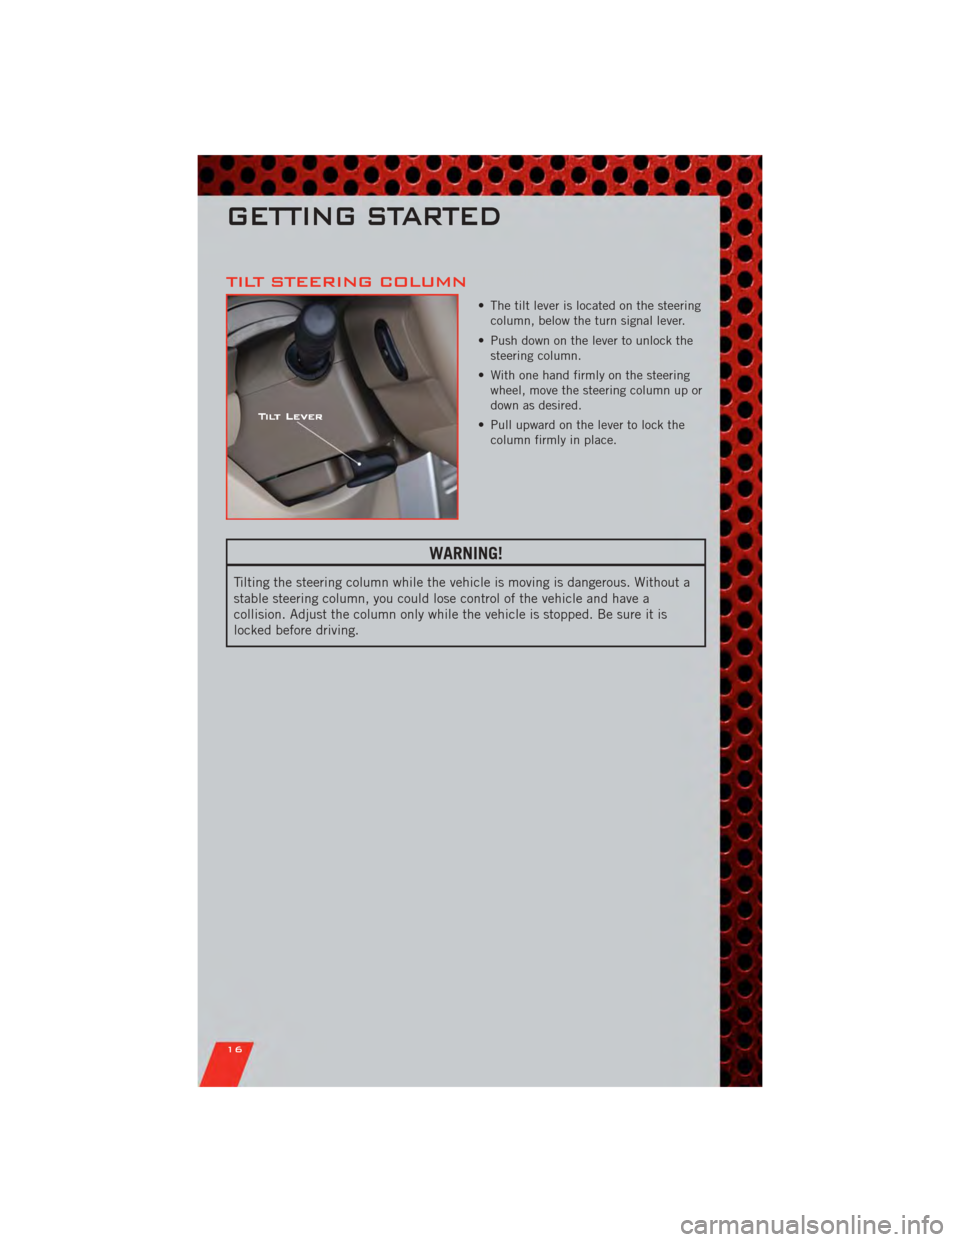 DODGE NITRO 2011 1.G Owners Manual TILT STEERING COLUMN
• The tilt lever is located on the steeringcolumn, below the turn signal lever.
• Push down on the lever to unlock the steering column.
• With one hand firmly on the steerin